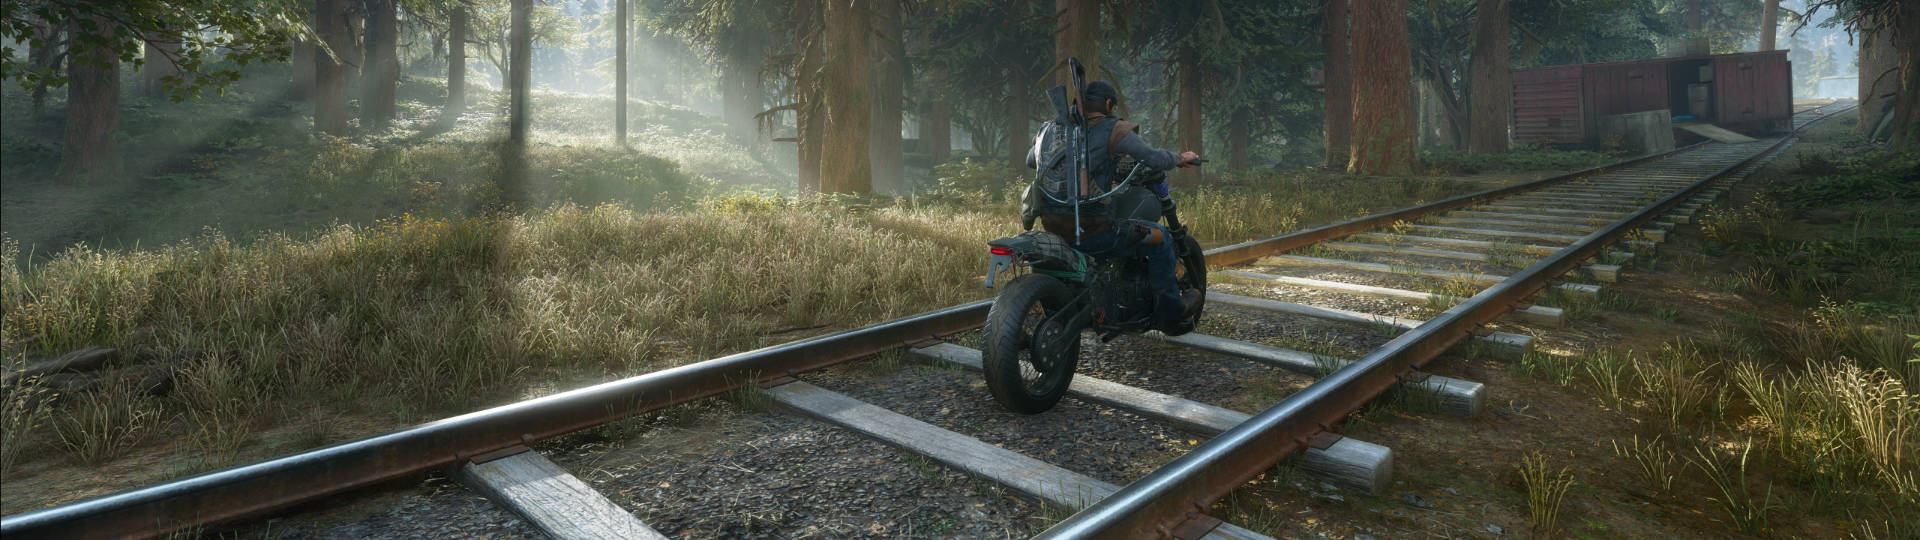 Days Gone data collection disabled slice